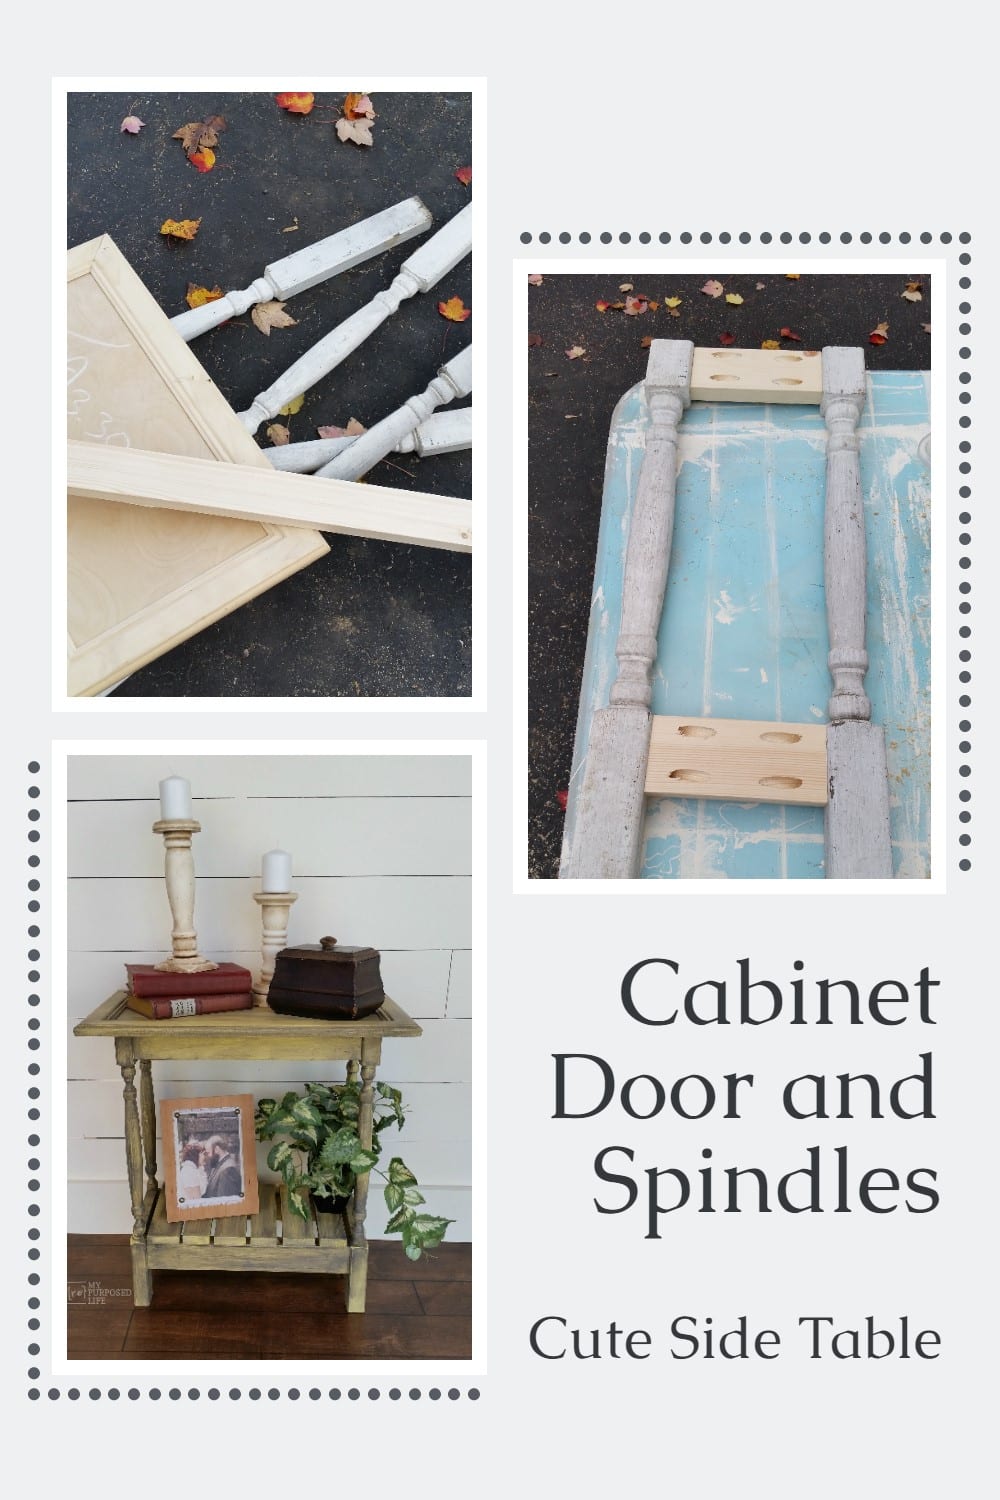 Cabinet Door Side Table Using bits and pieces you can easily build your own custom side table. #MyRepurposedLife #diy #repurposed #bits&pieces #spindles #cabinetdoor #repurposed via @repurposedlife